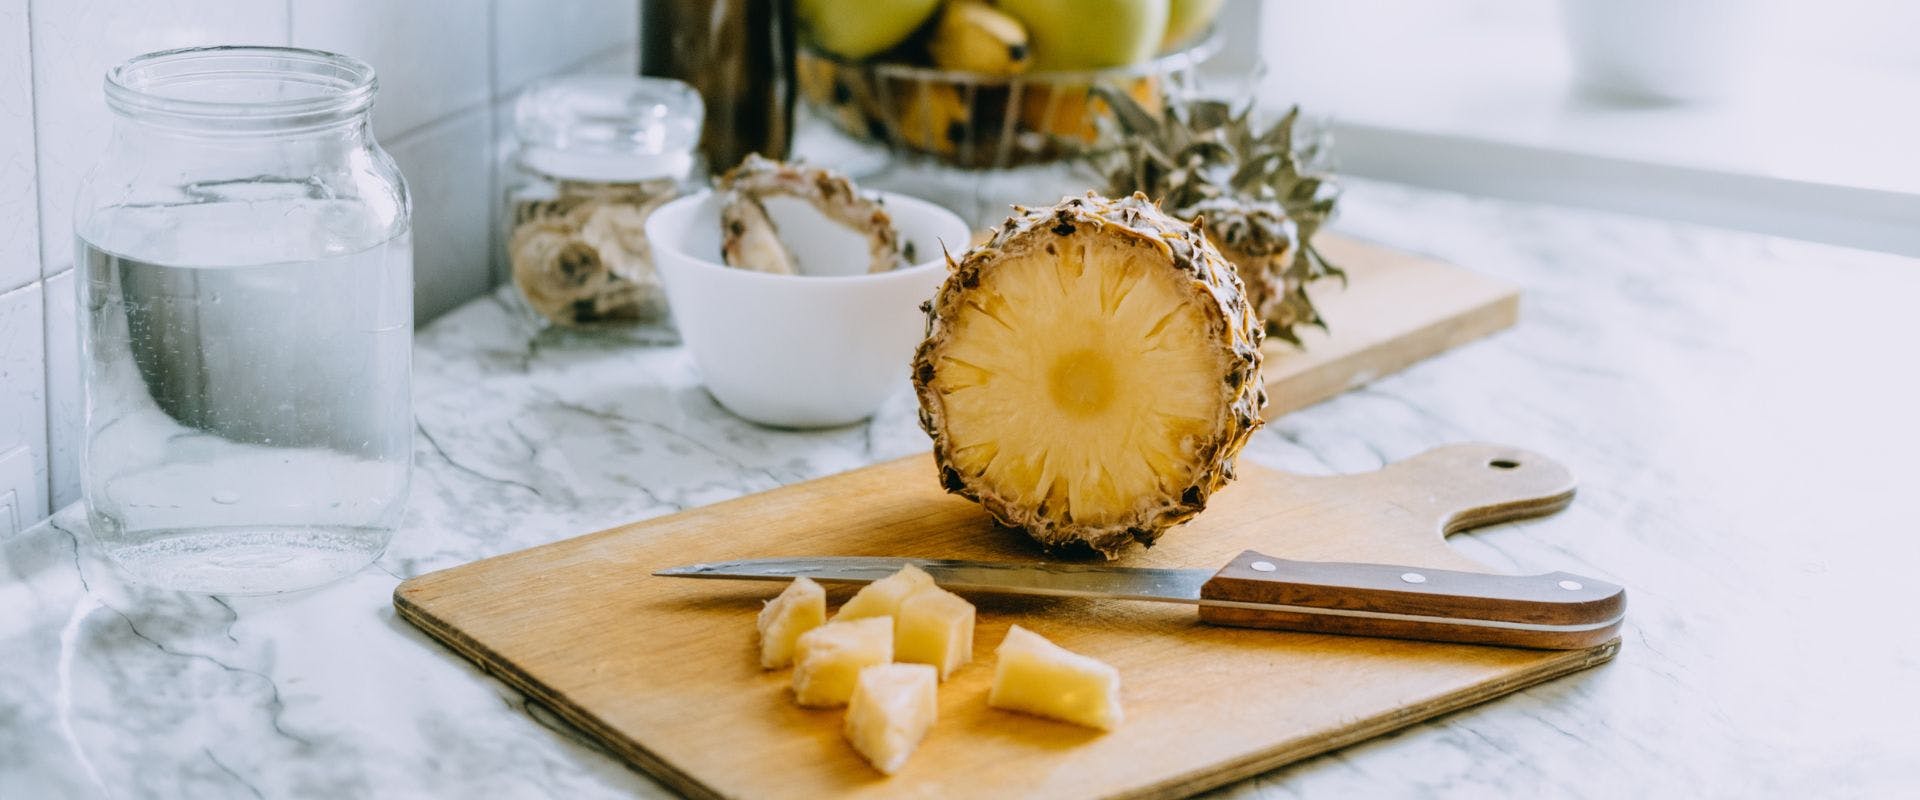 Pineapple on a chopping board